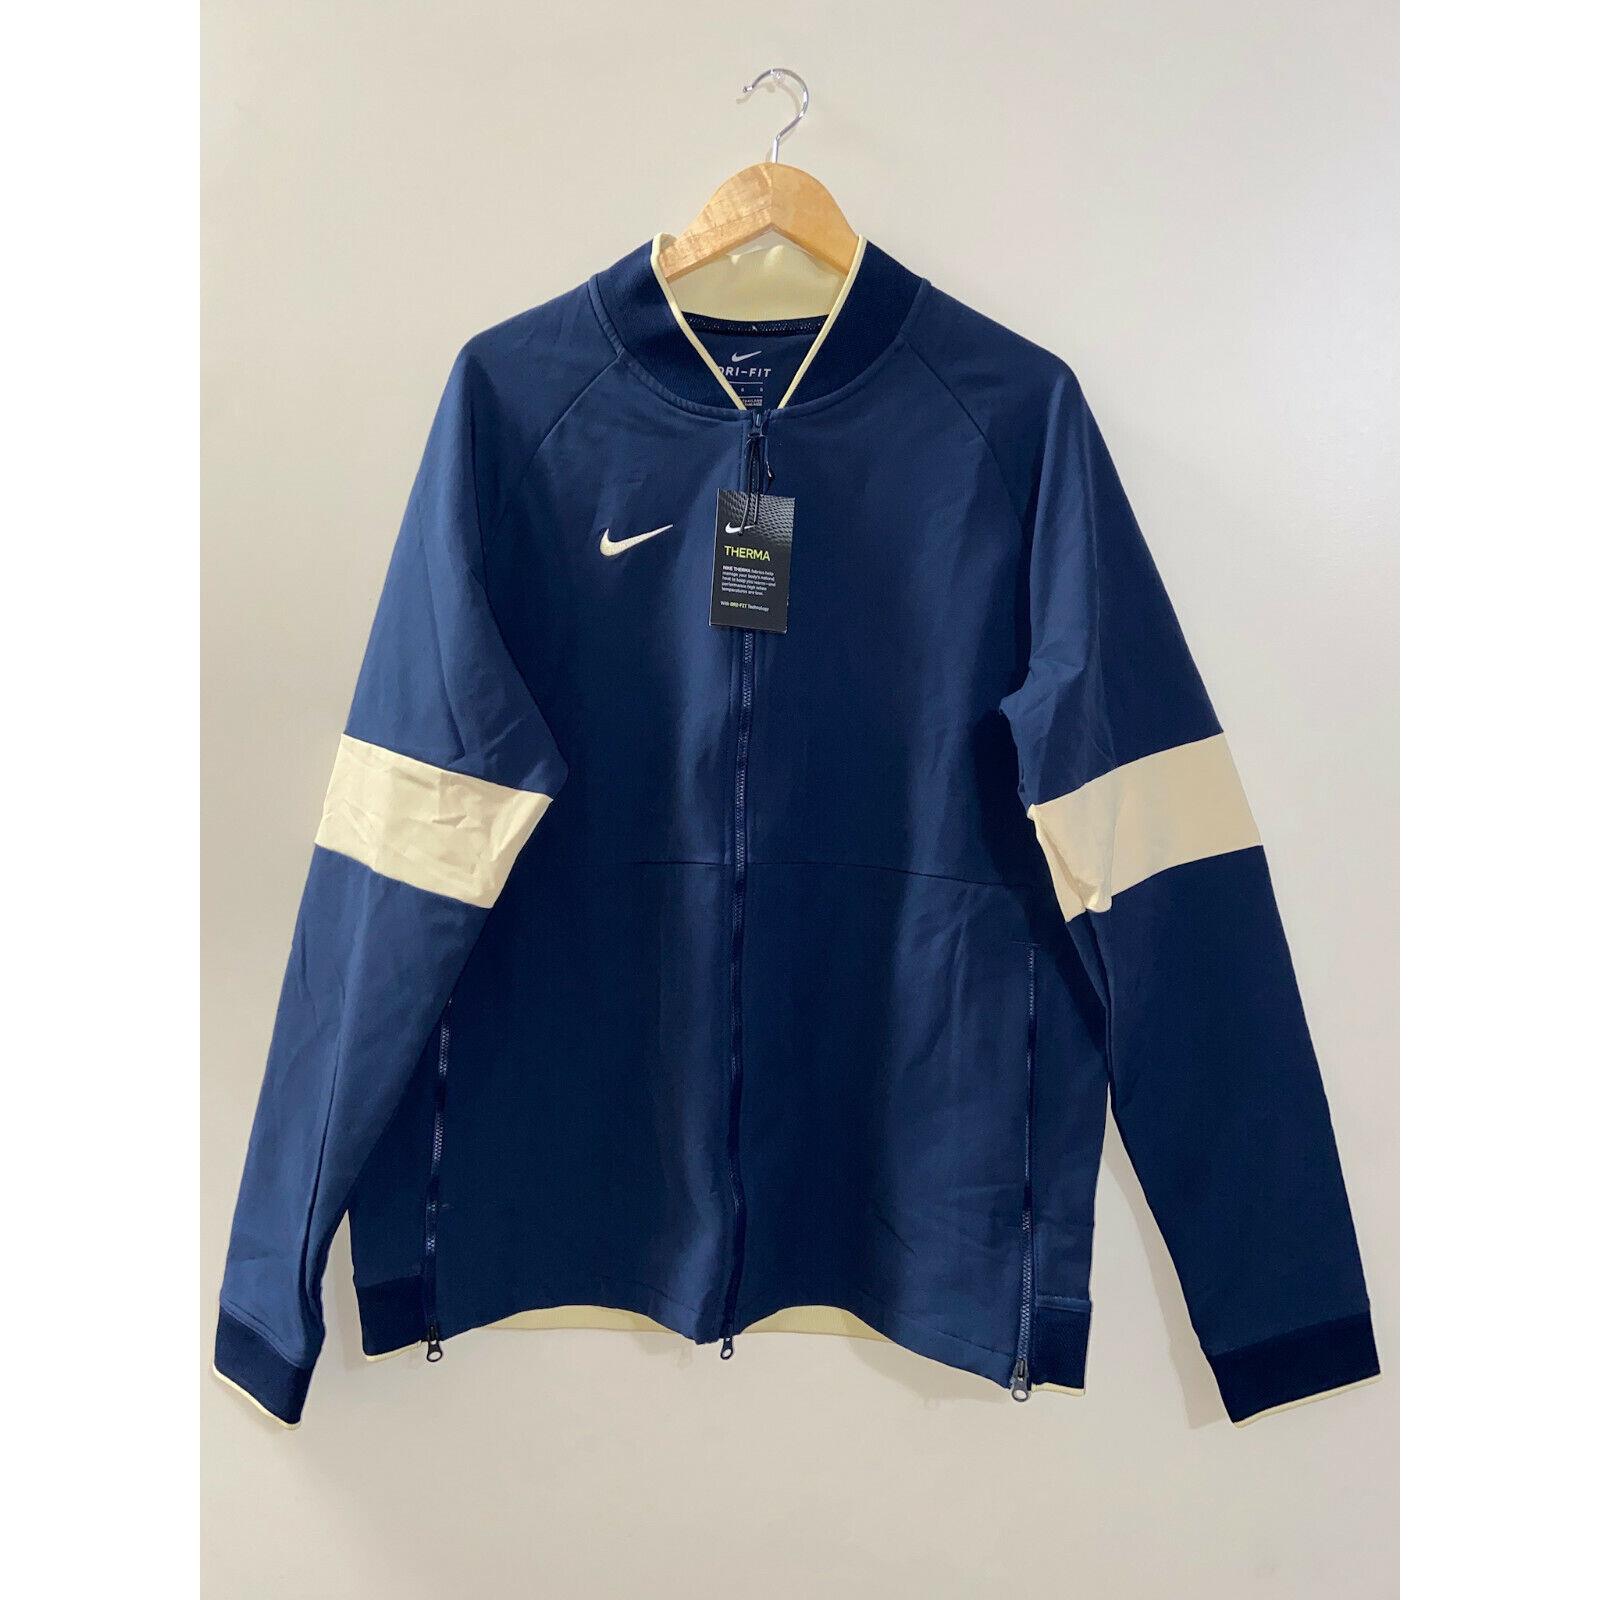 Nike Therma Midweight Football Coach Jacket Navy Gold Notre Dame AO5854-422 L